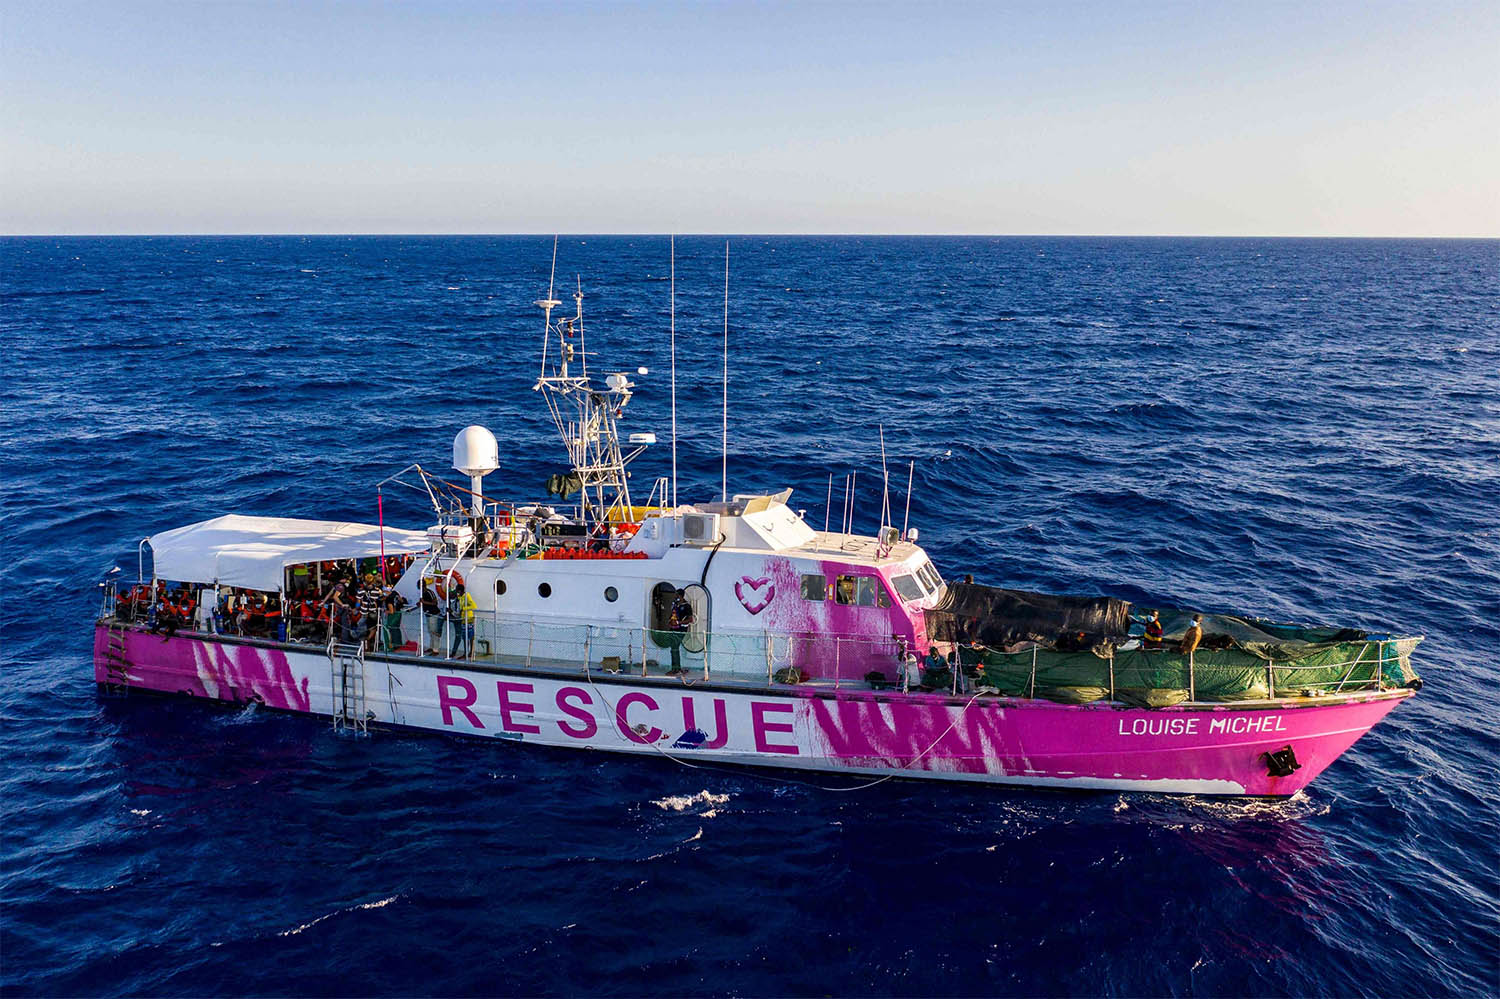 The rescue ship funded by British street artist Banksy